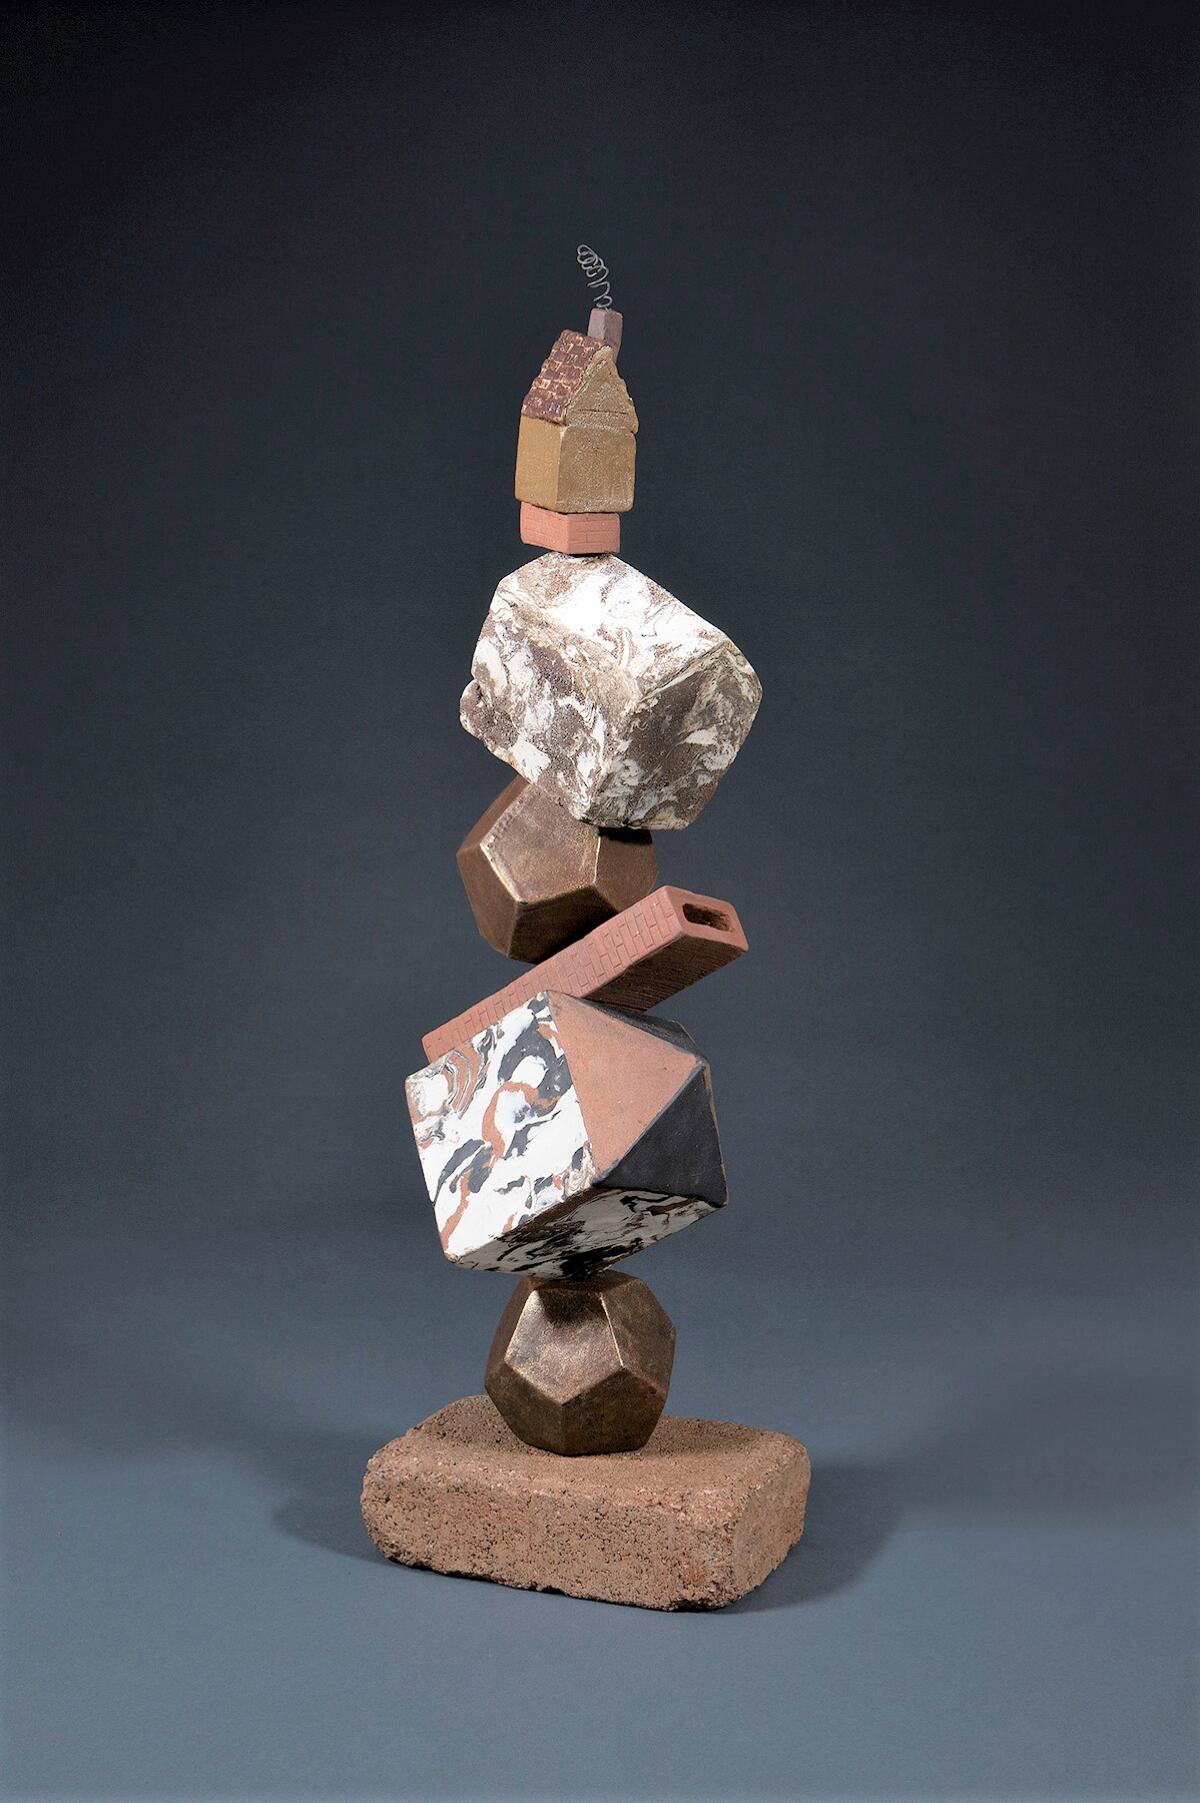 "Topsy Turvy," by Beverly Jacobs on view at “The Anthropocene Epiphany" exhibit.